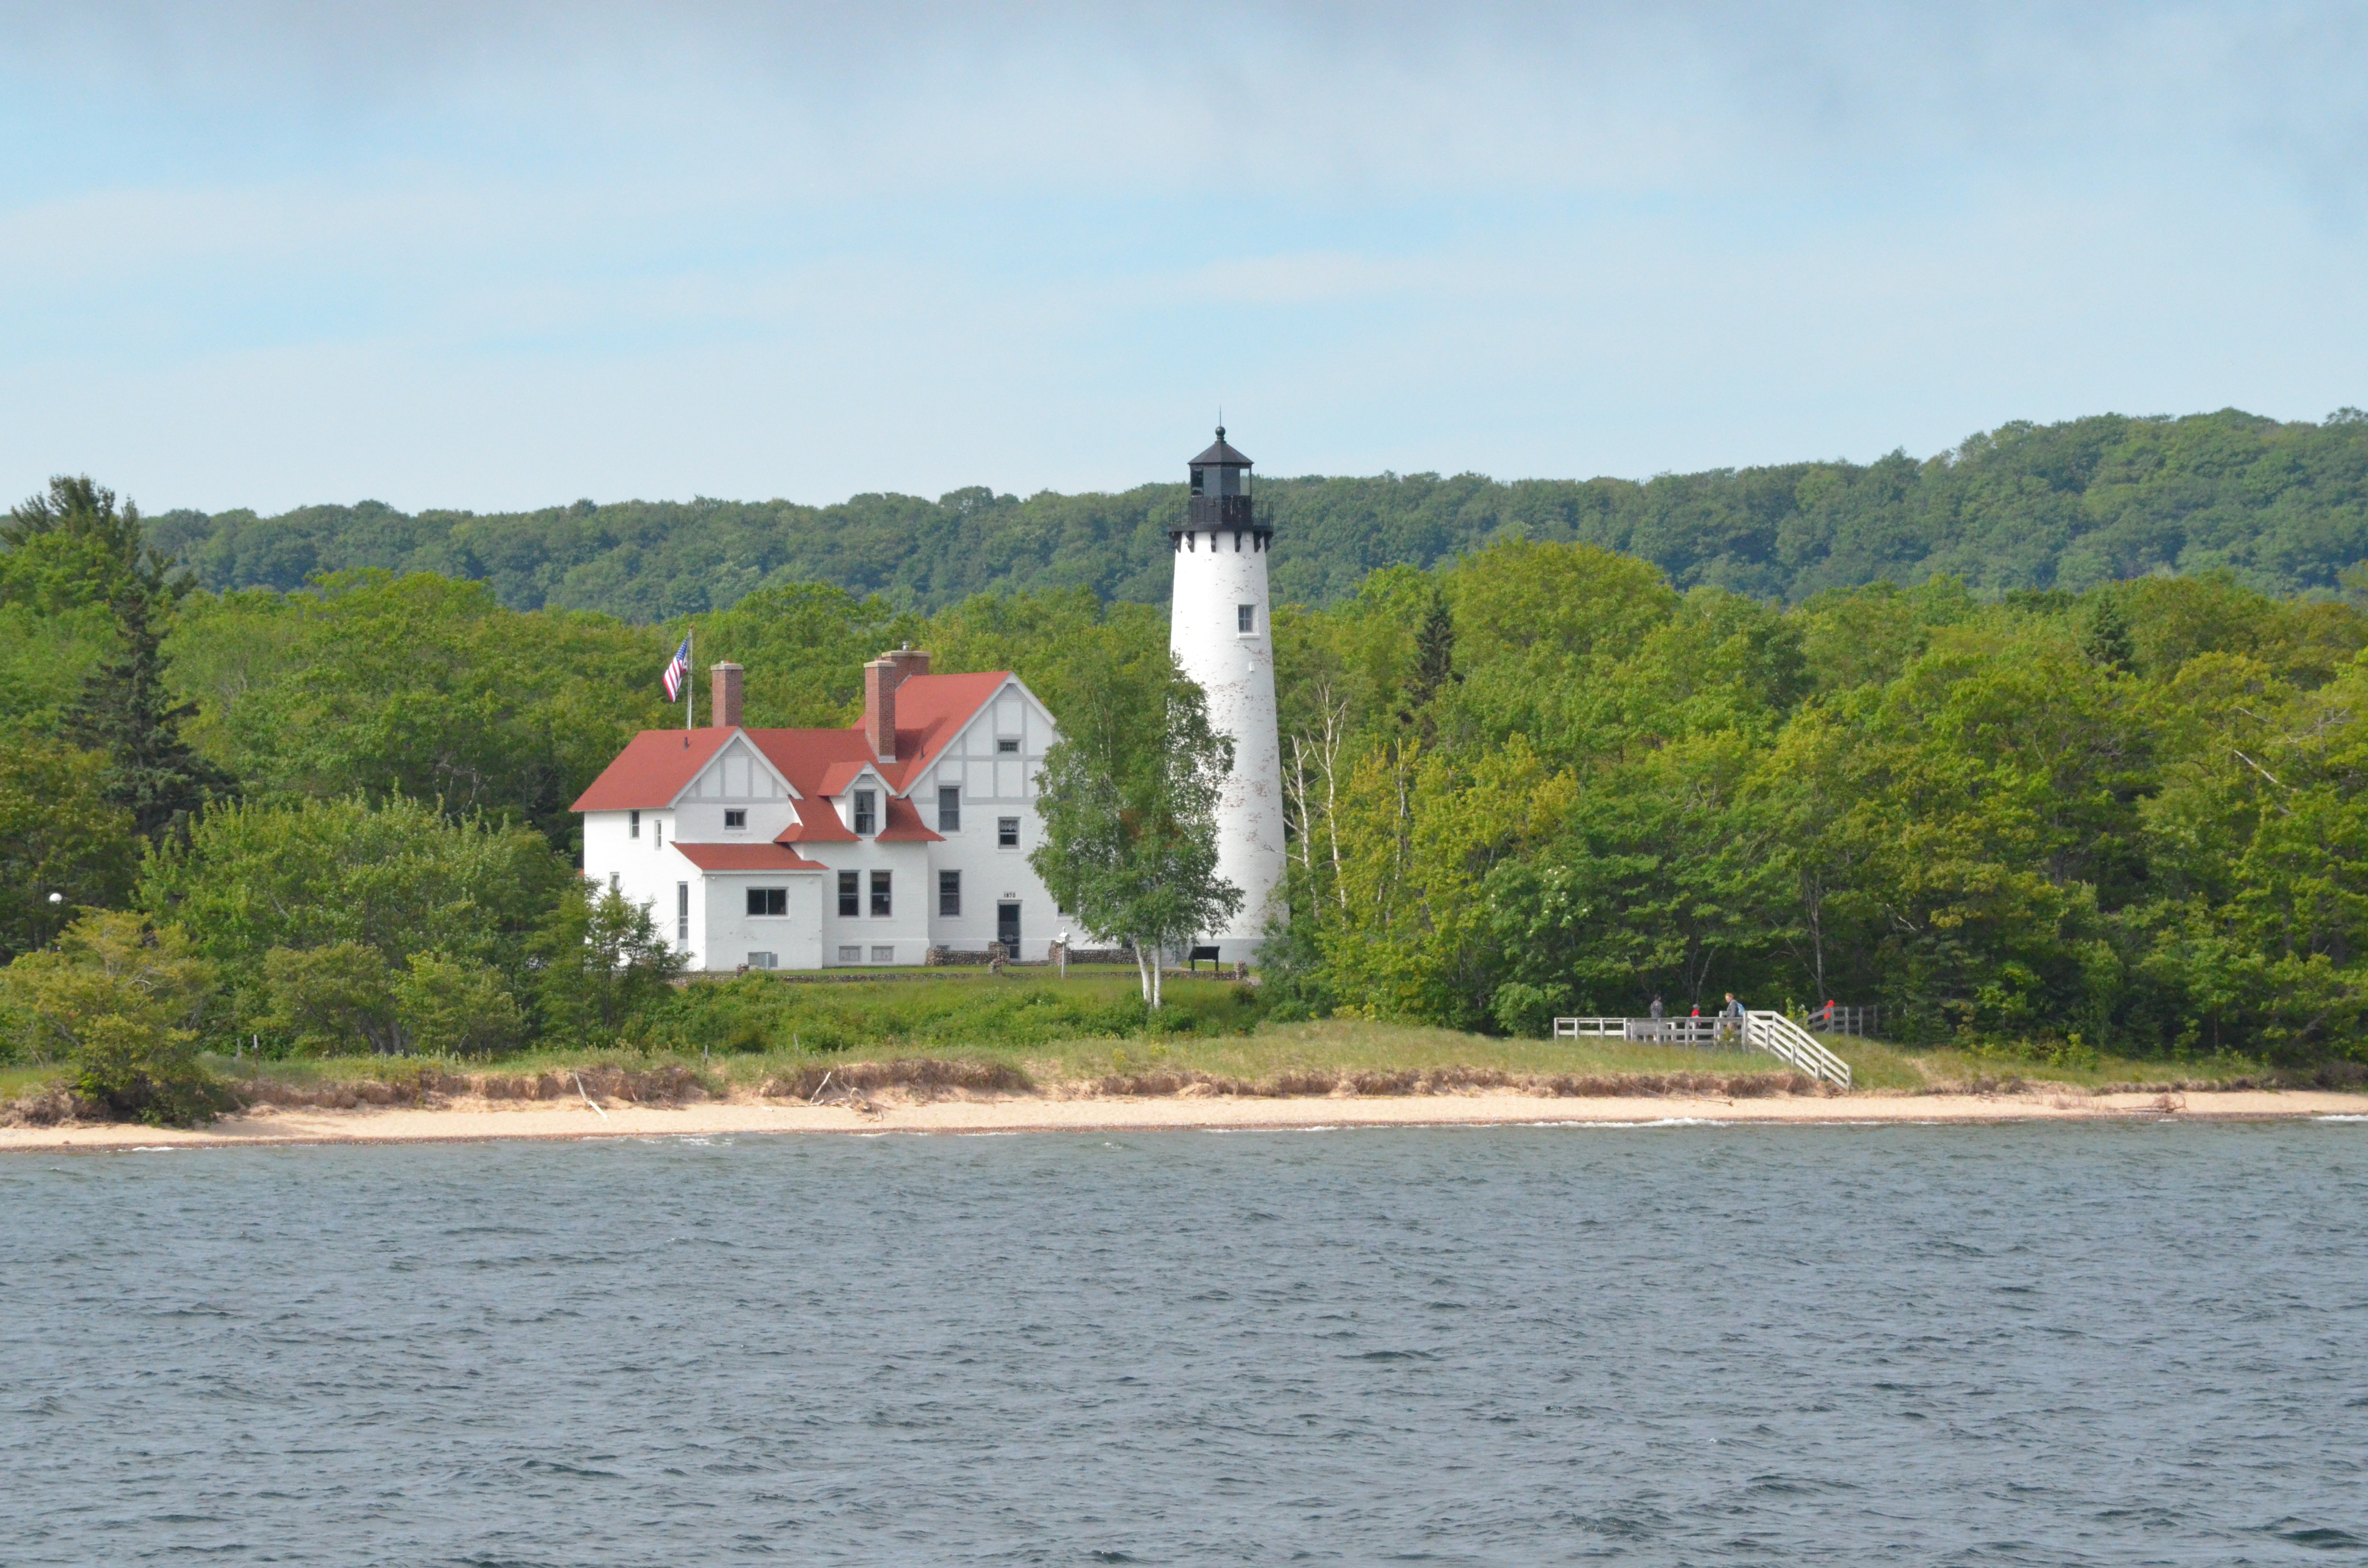 Point Iroquois Lighthouse seen from Soo Locks Boat Cruise